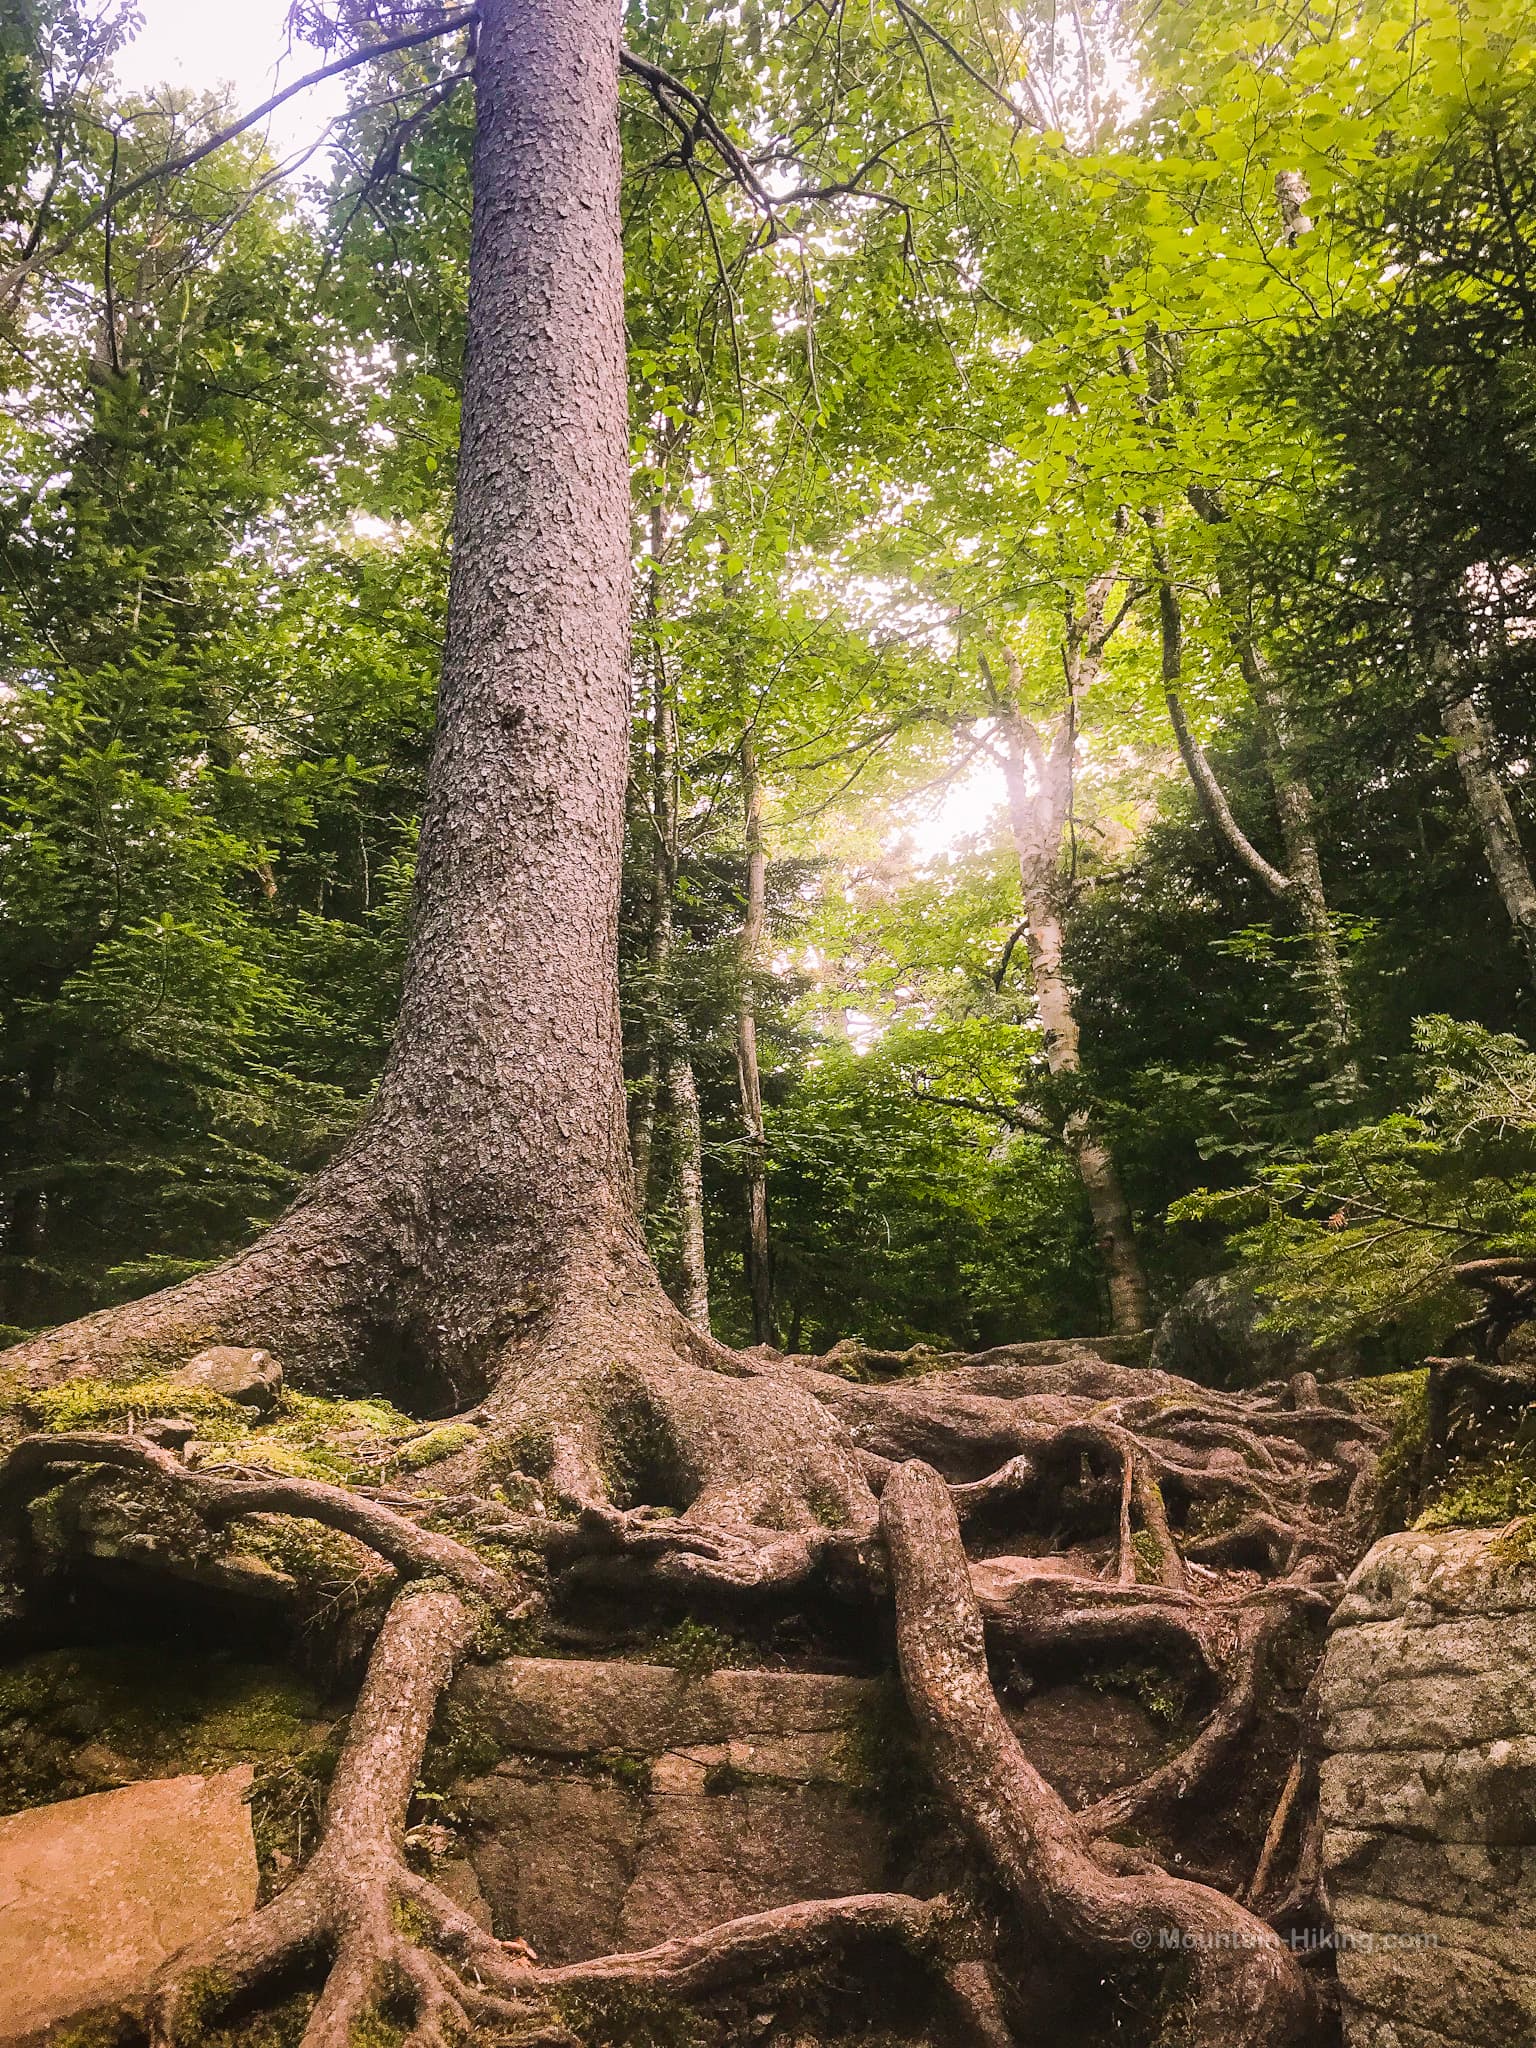 old tree with roots exposed